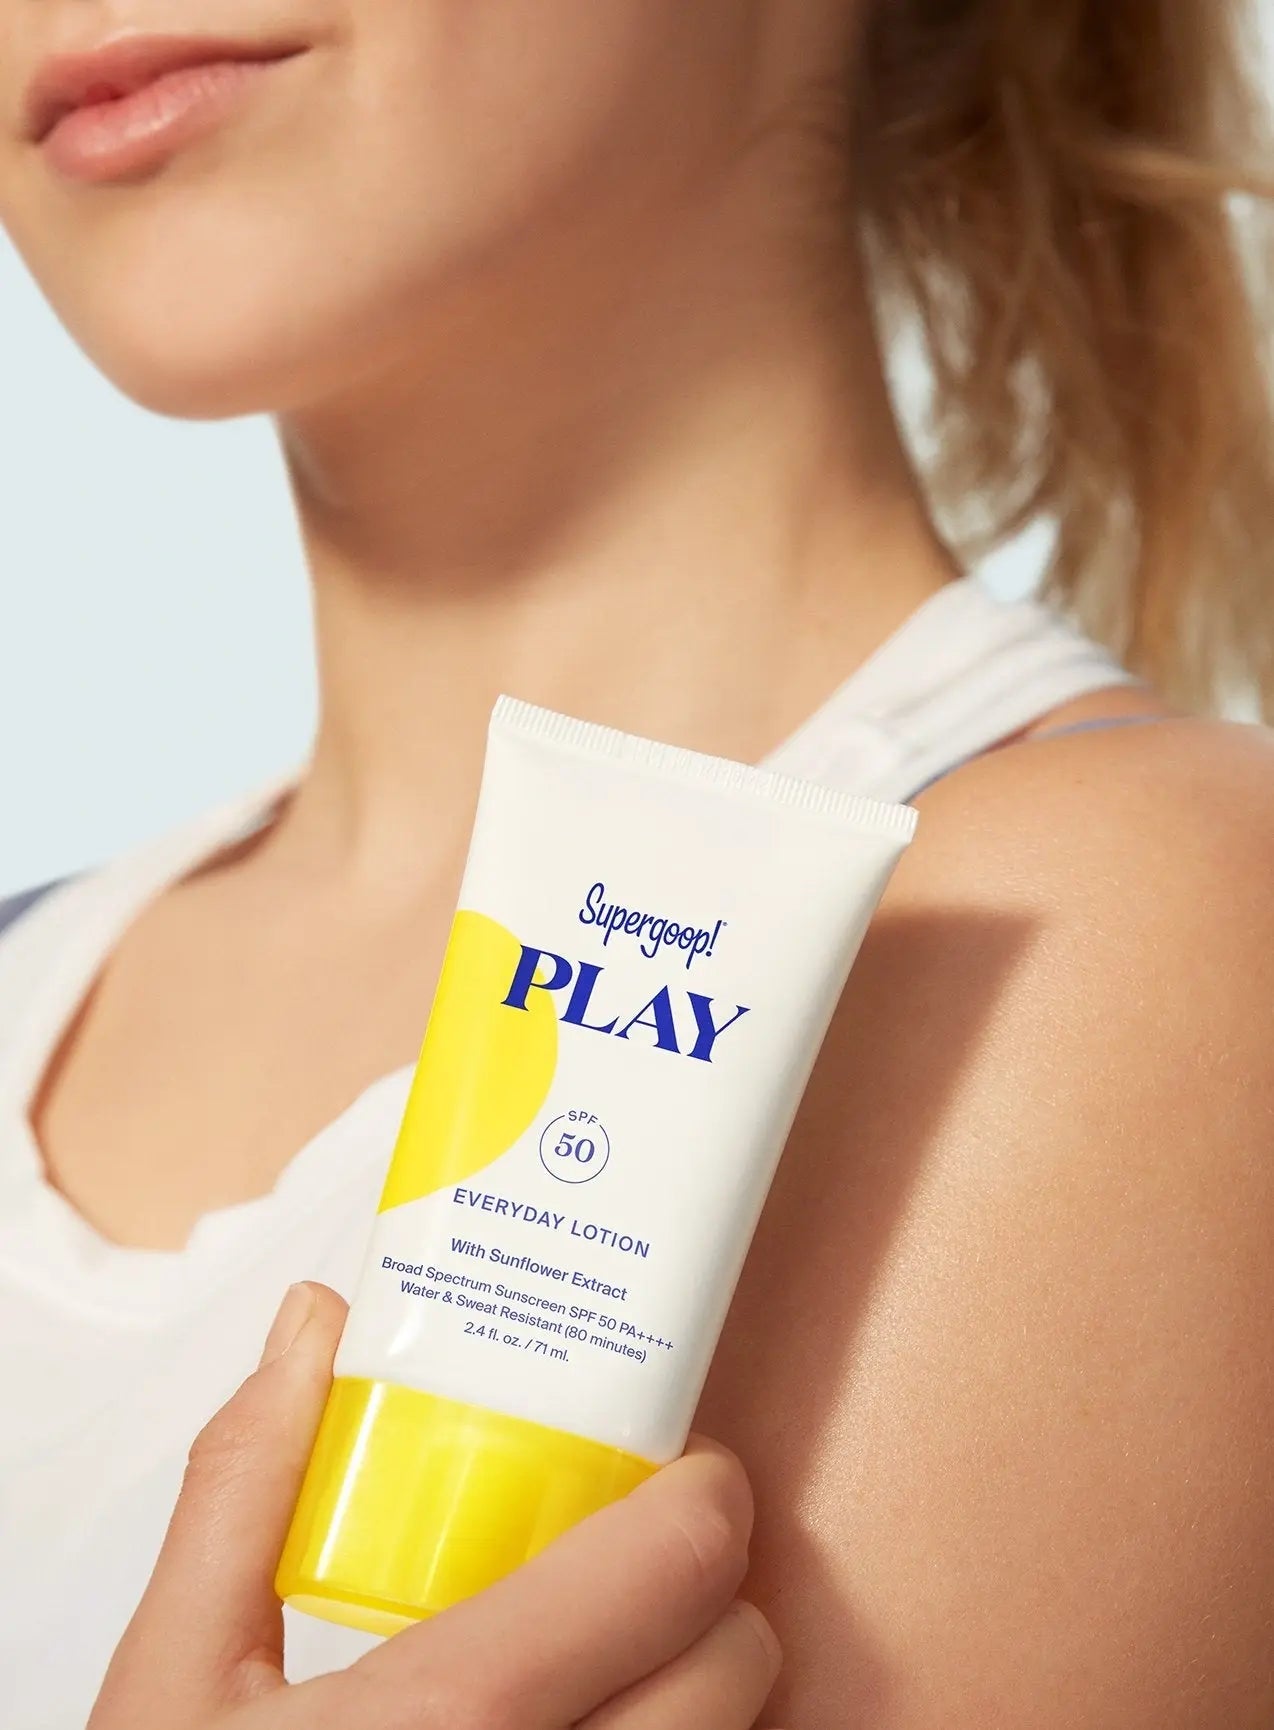 PLAY Everyday Lotion SPF 50 Sunscreen Supergoop!   